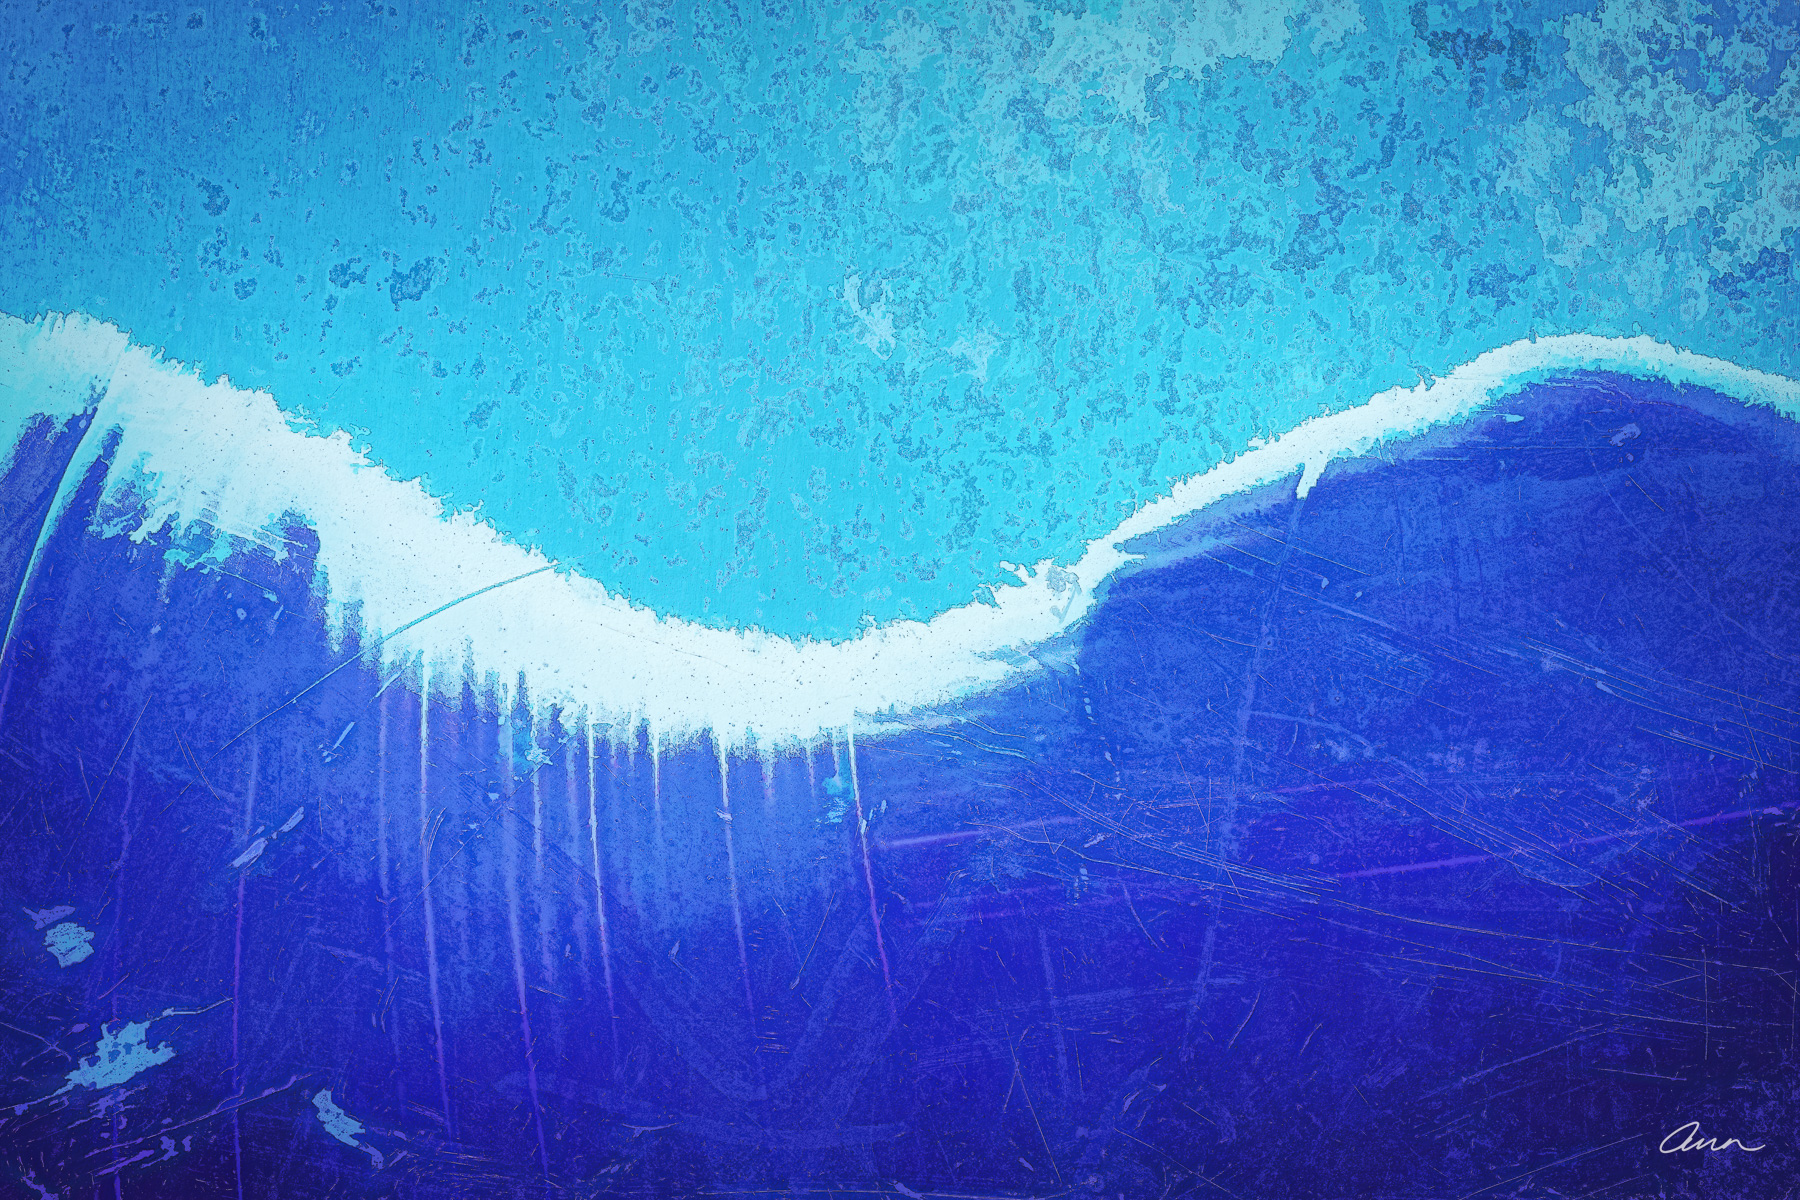 Close-up of metal scrapes and paint overspray that looks like an ocean with foam spilling over the top of the wave.